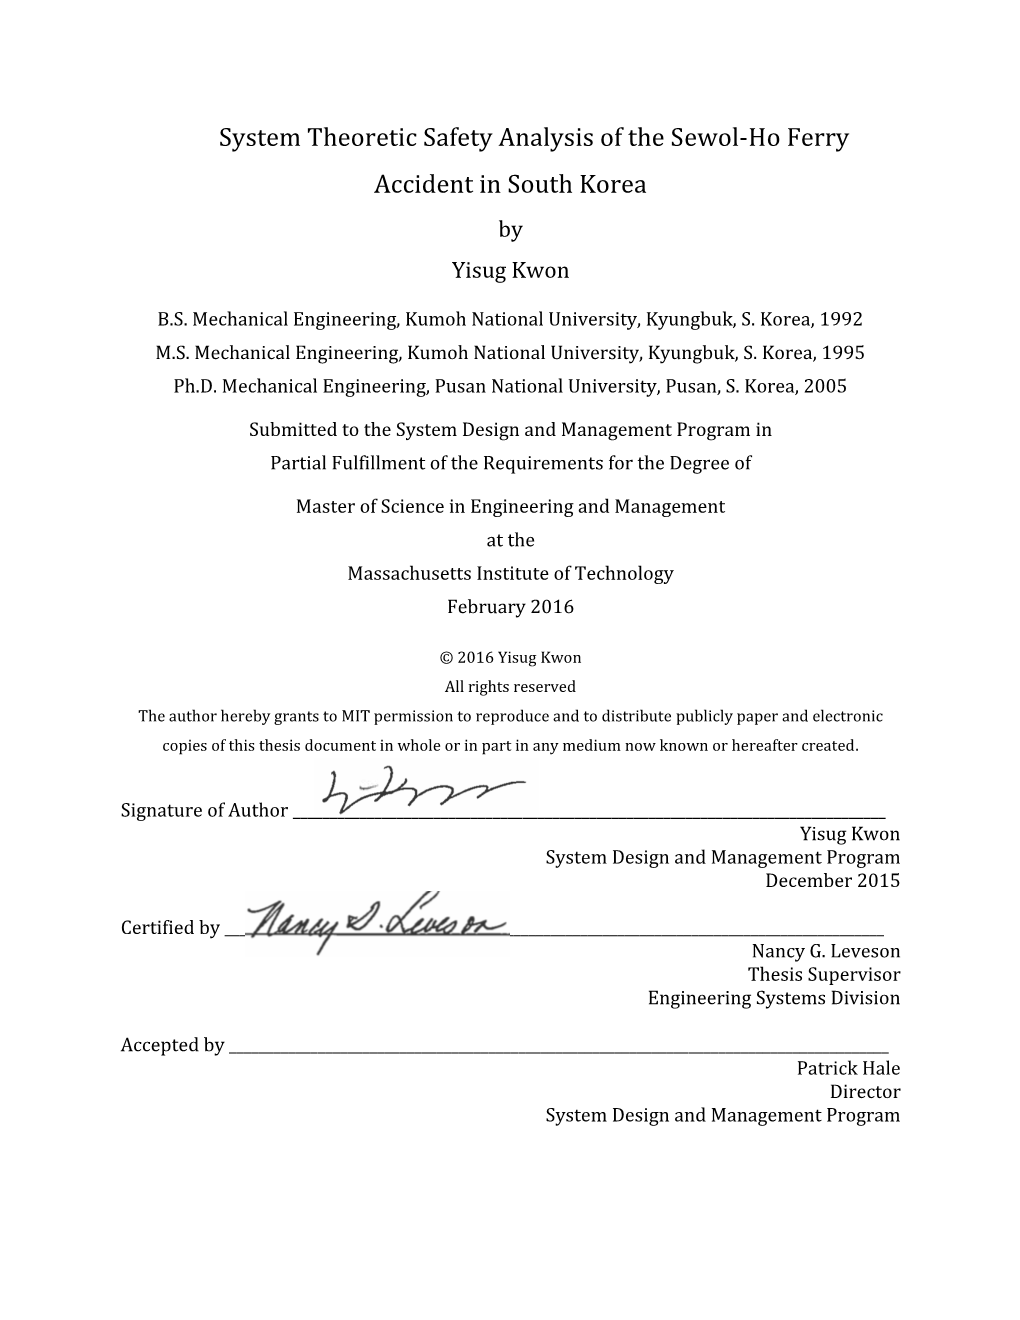 System Theoretic Safety Analysis of the Sewol-Ho Ferry Accident in South Korea by Yisug Kwon